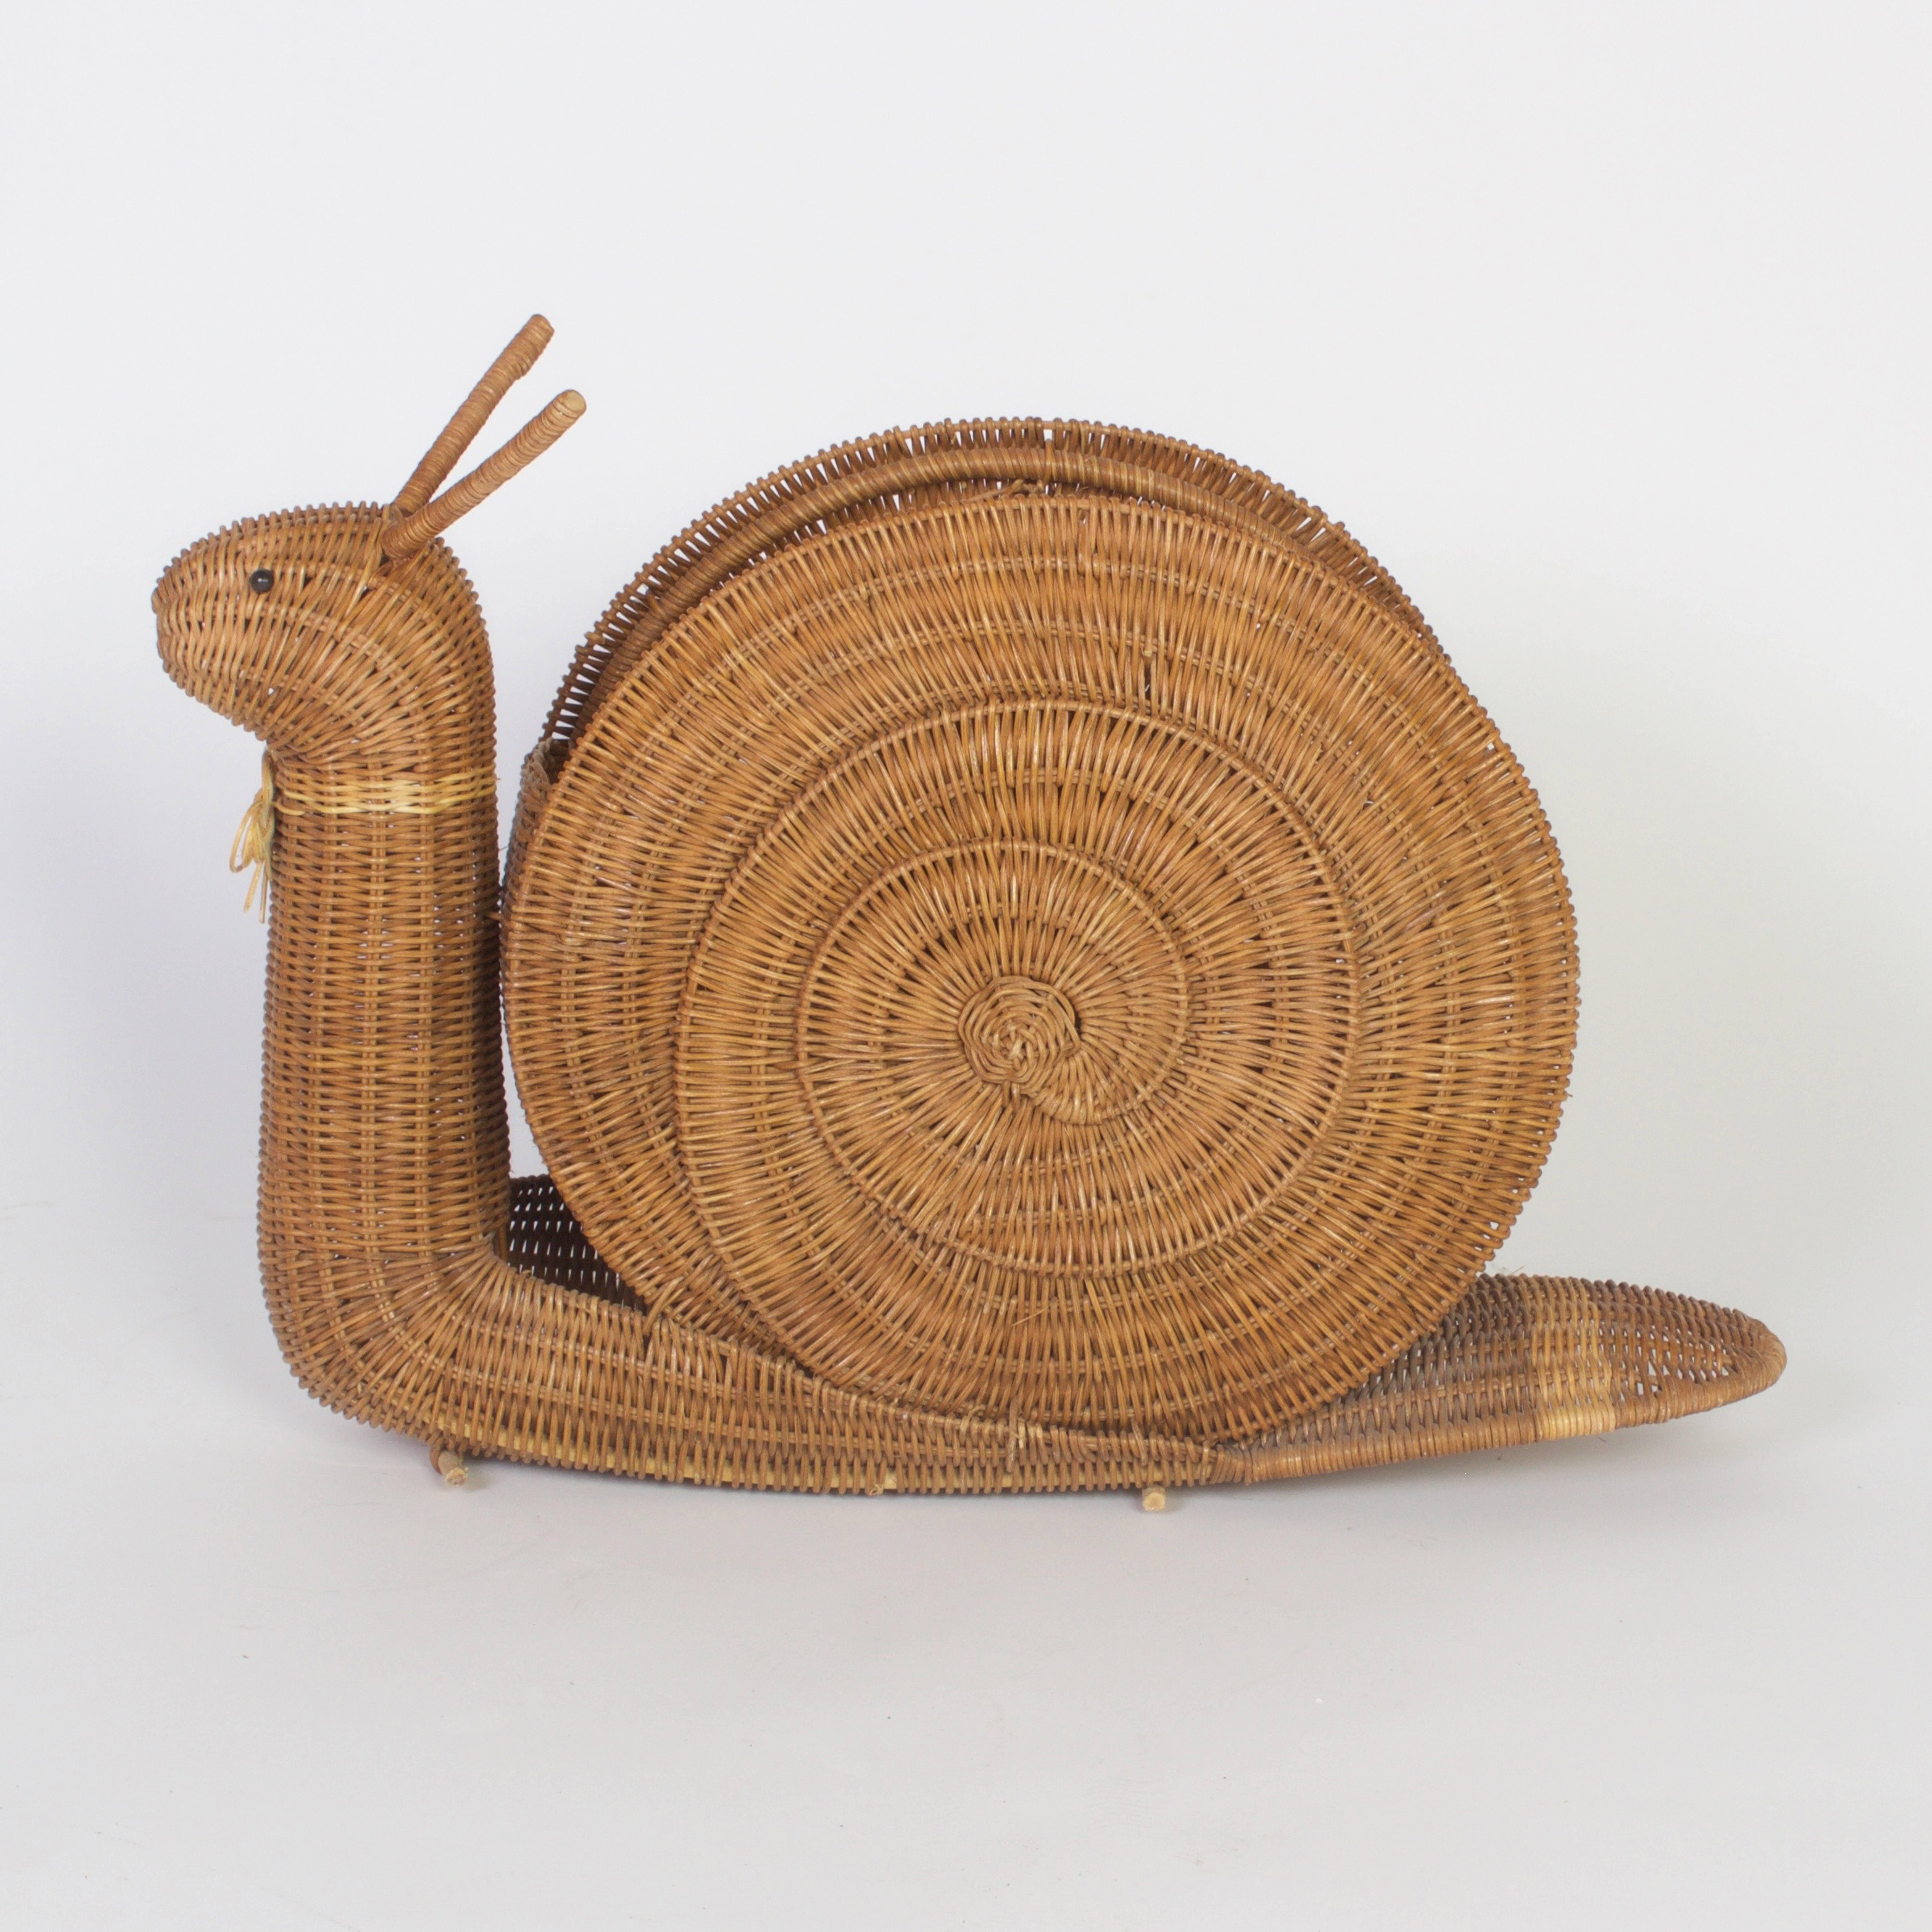 Charming mid century wicker or reed magazine stand in shape of a snail. The storage section is a snail shell in a nautilus pattern. The snail with fully equiped antennae is sporting a collar with a bow. Style meets function in a mellow, organic